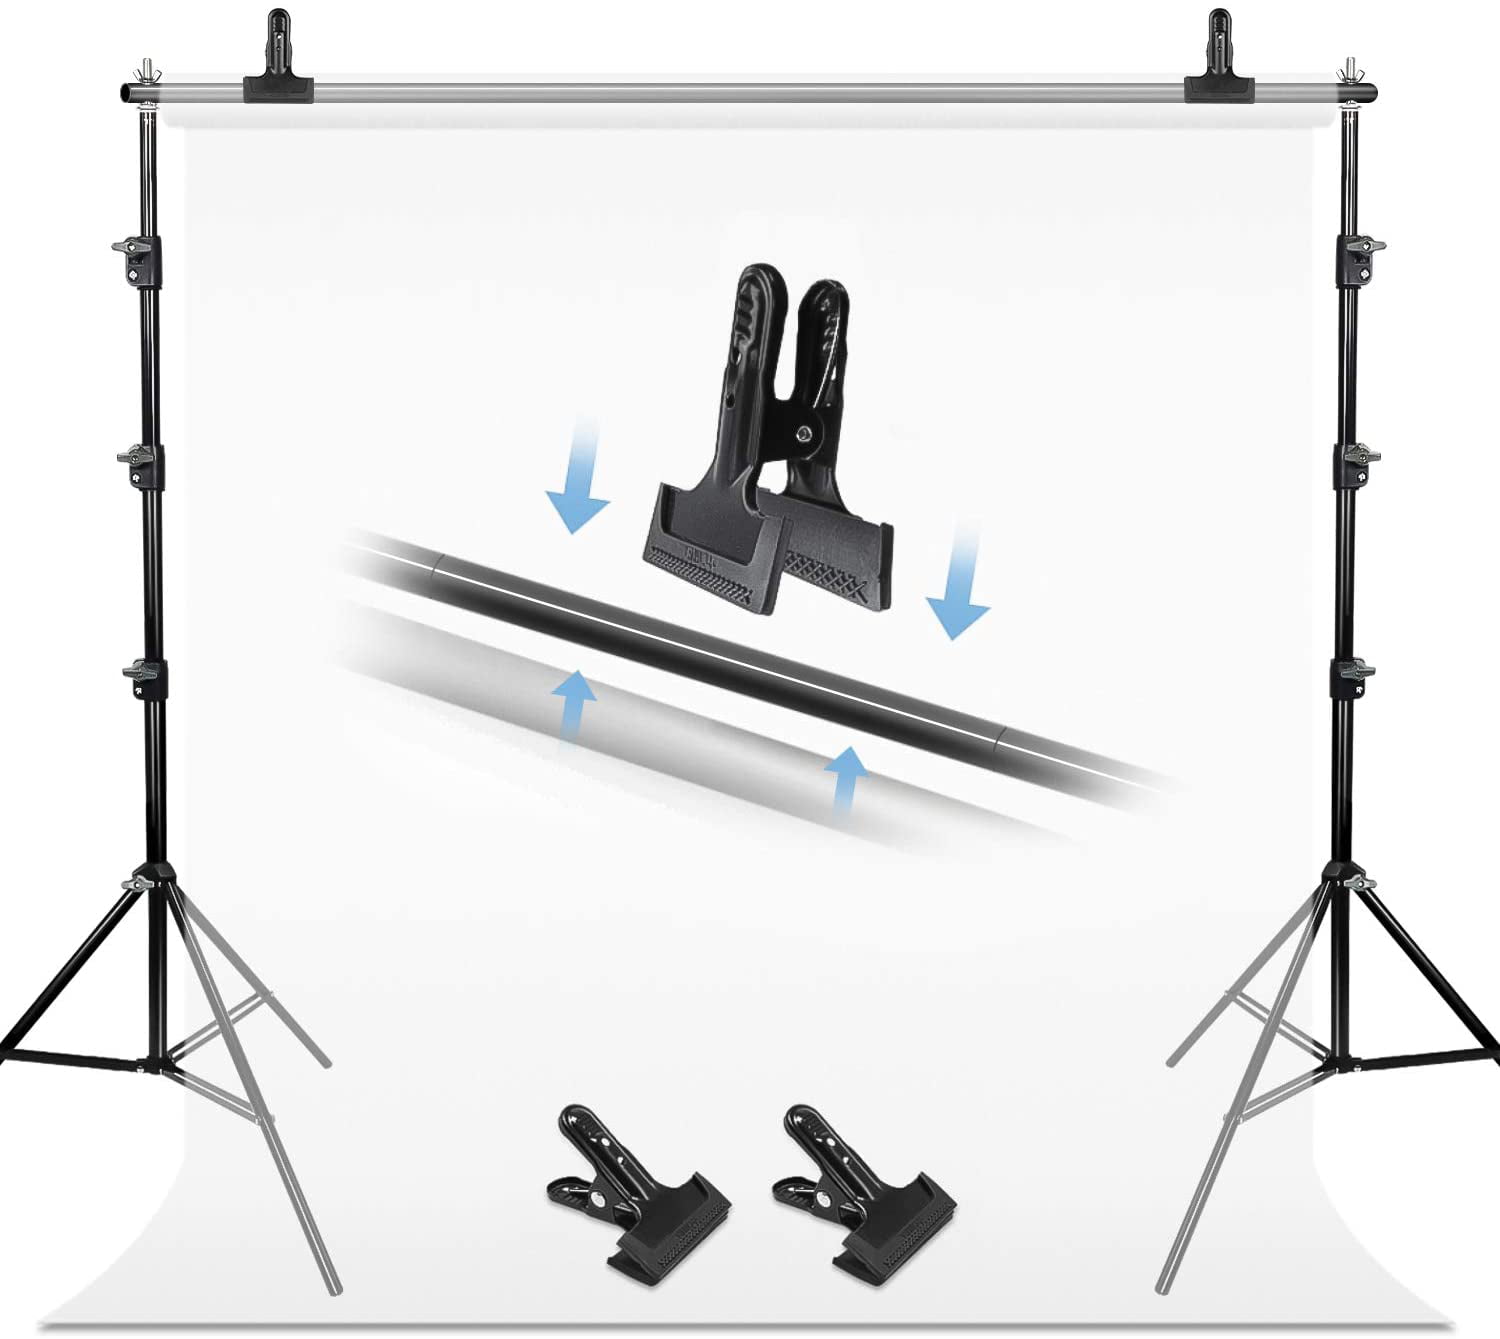 Cross Bar Adjustable 5-10 ft Julius Studio Background Stand Backdrop Support System Kit JSAG598 Stand 9.4 ft Tall Carry Bag and Spring Clamp Clip for Photo Studio 